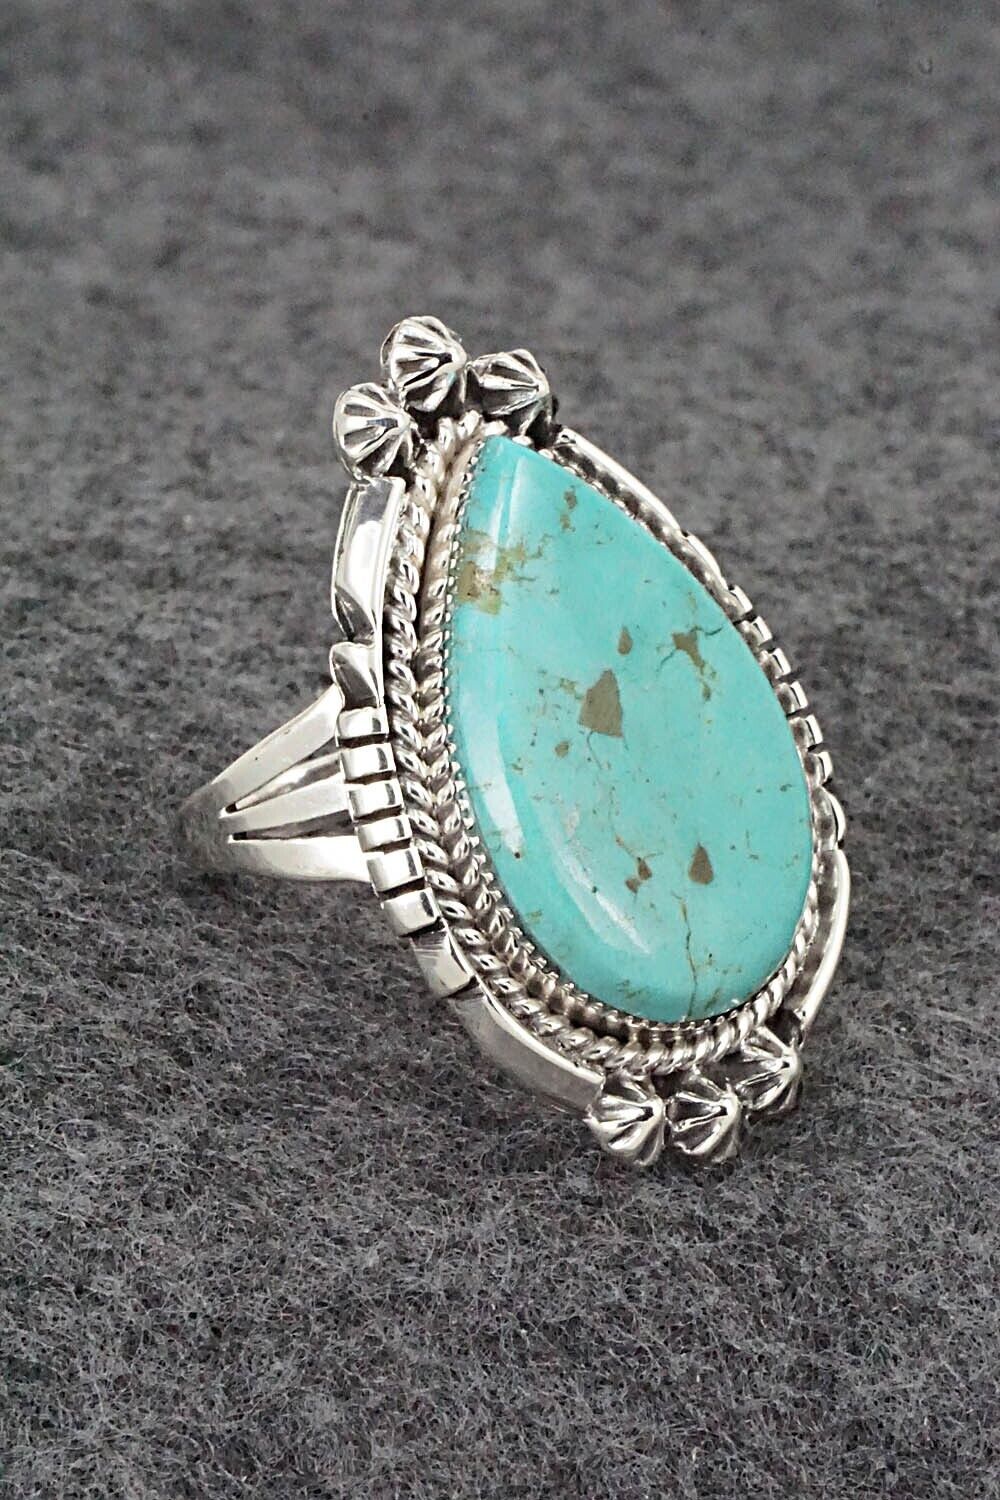 Turquoise & Sterling Silver Ring - Andrew Vandever - Size 7.25